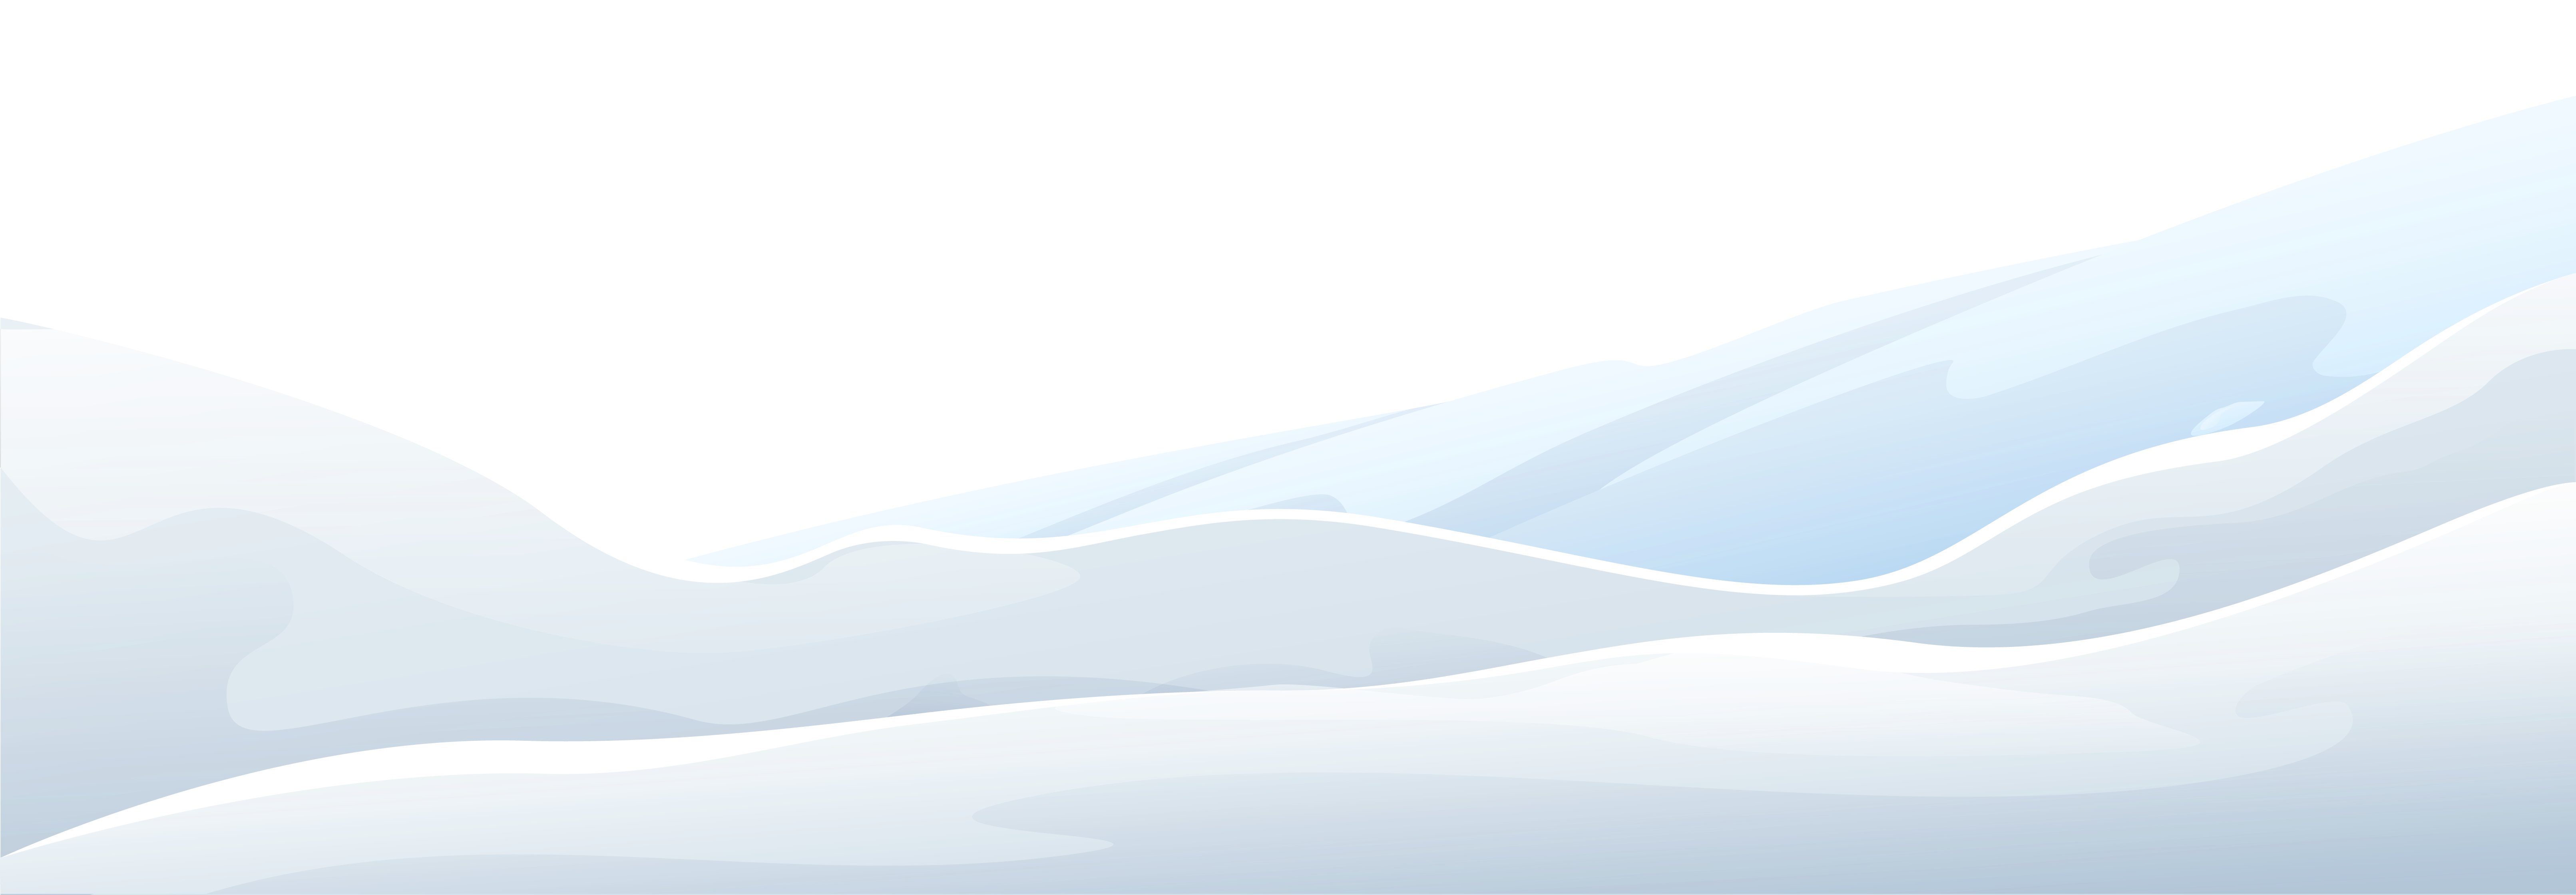 Hills clipart snowy, Hills snowy Transparent FREE for